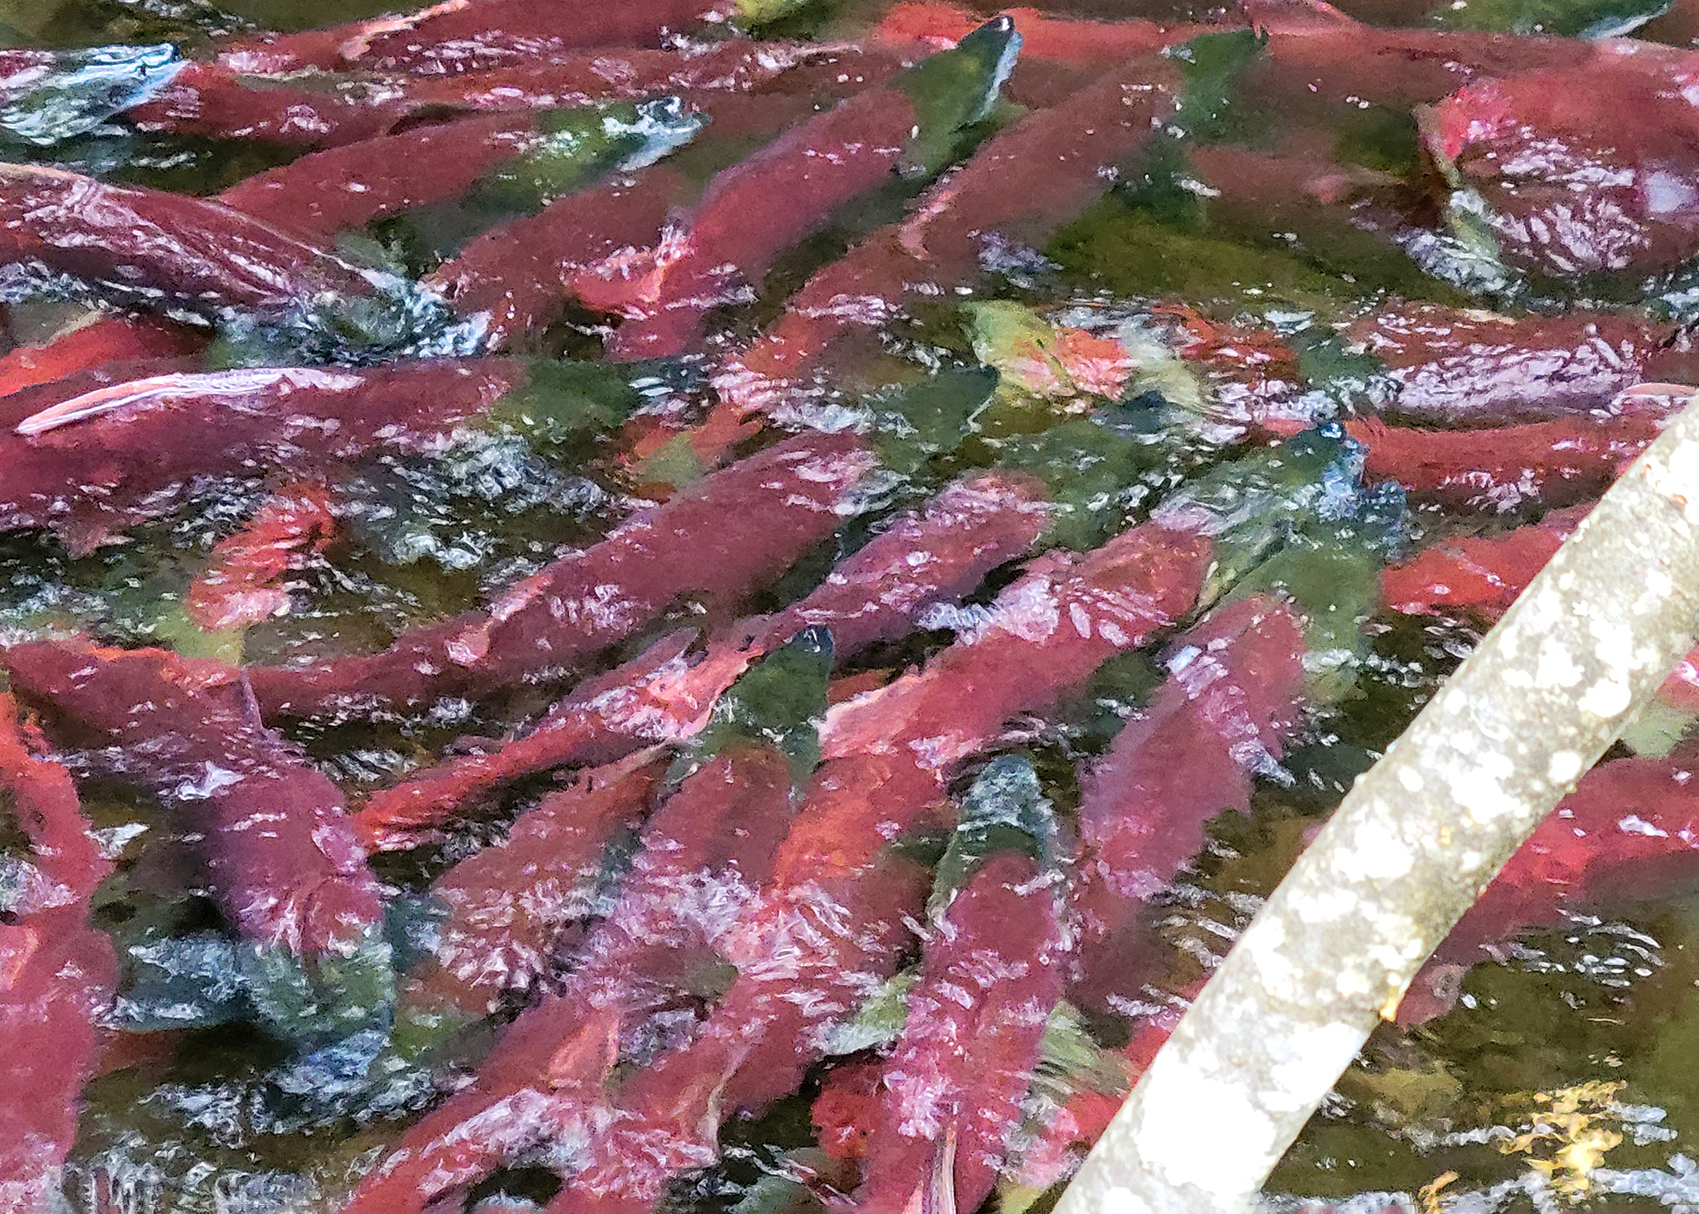 Falls Creek: Overcrowded and stressed salmon stranded in oxygen-poor pools 